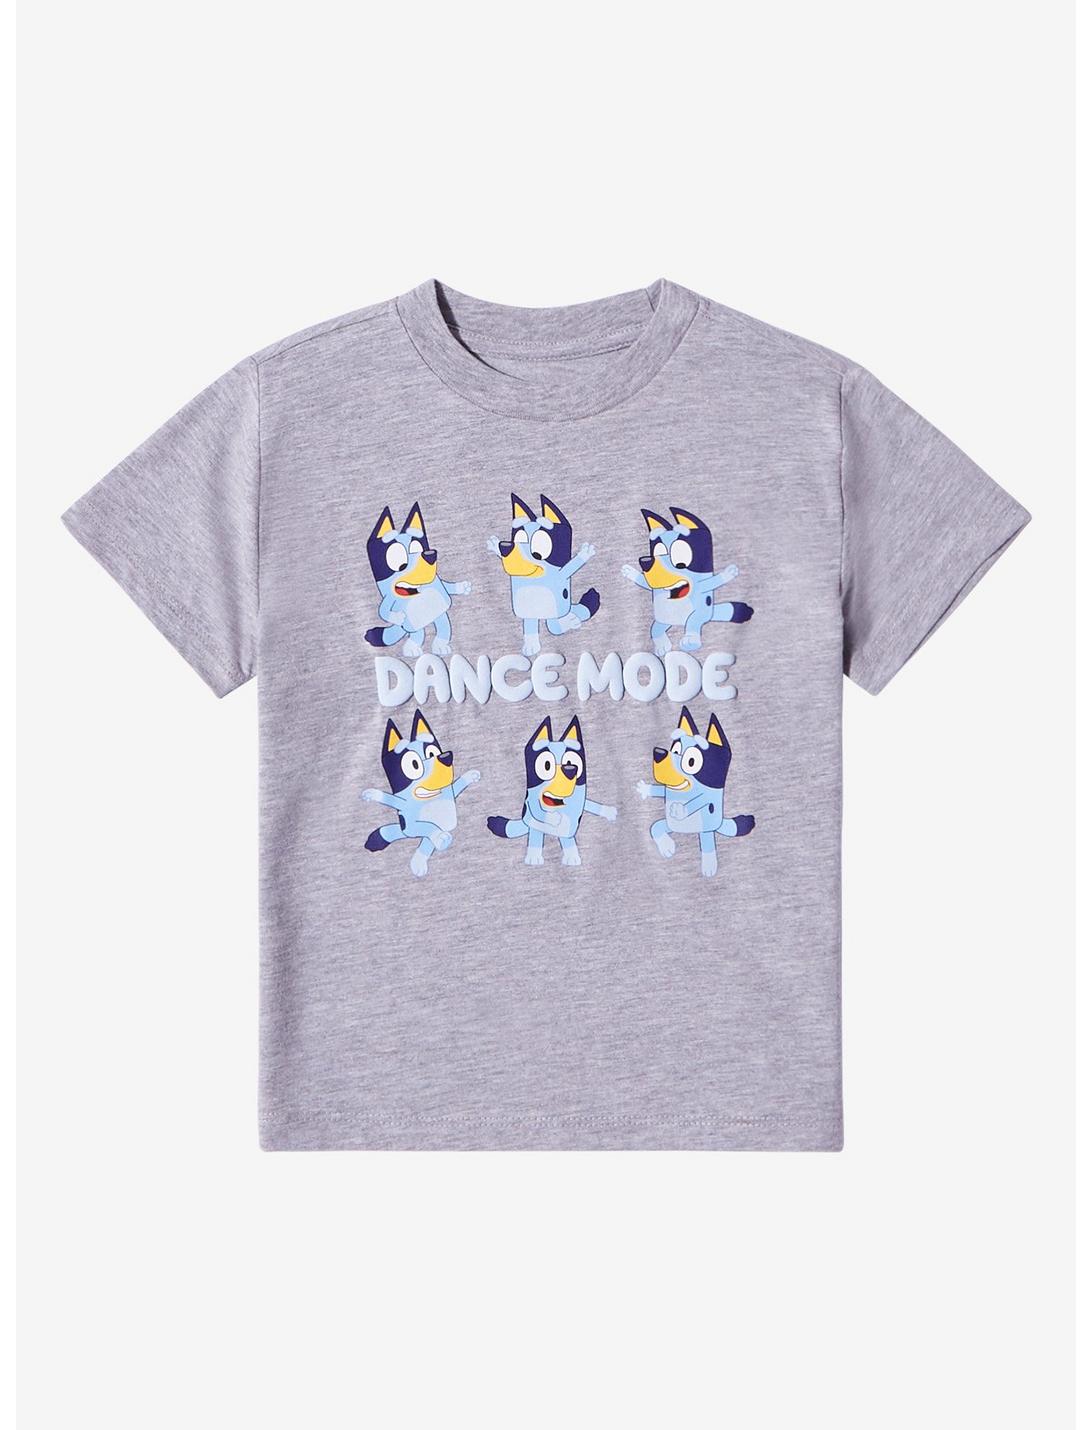 Bluey Dance Mode Toddler T-Shirt - BoxLunch Exclusive, GREY, hi-res